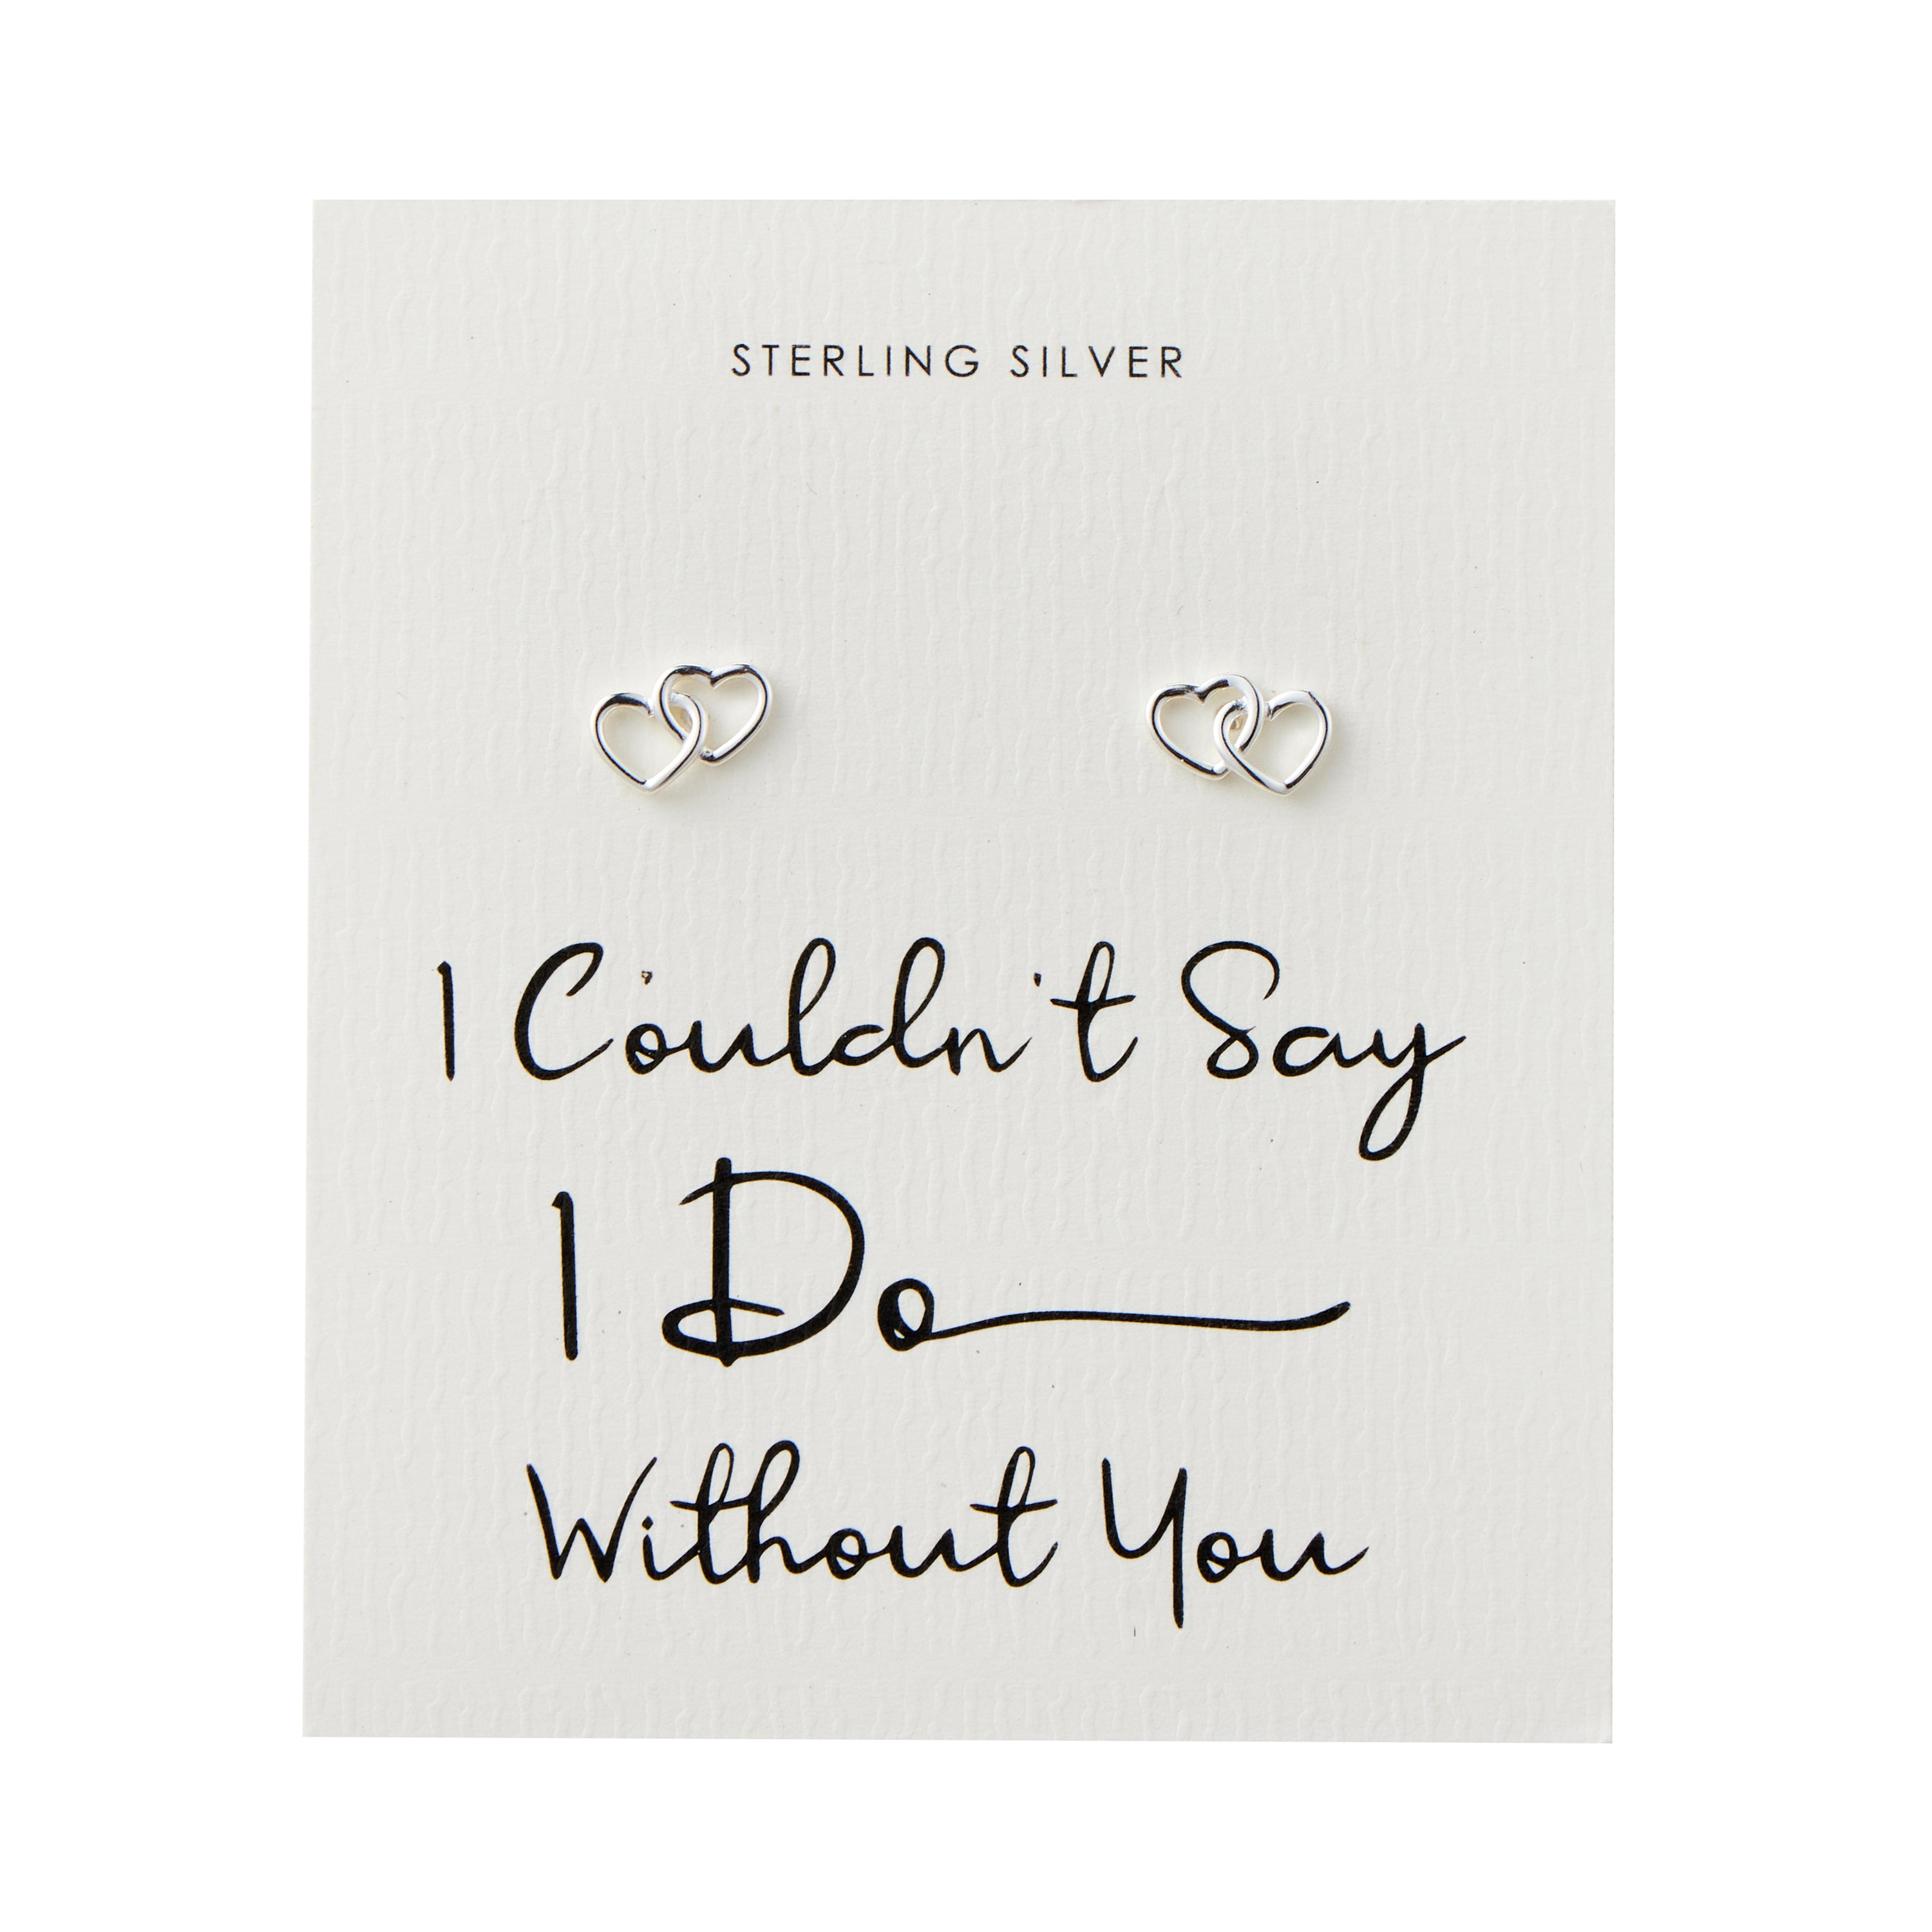 Sterling Silver I Couldn't Say I Do Without You Heart Link Earrings by Philip Jones Jewellery